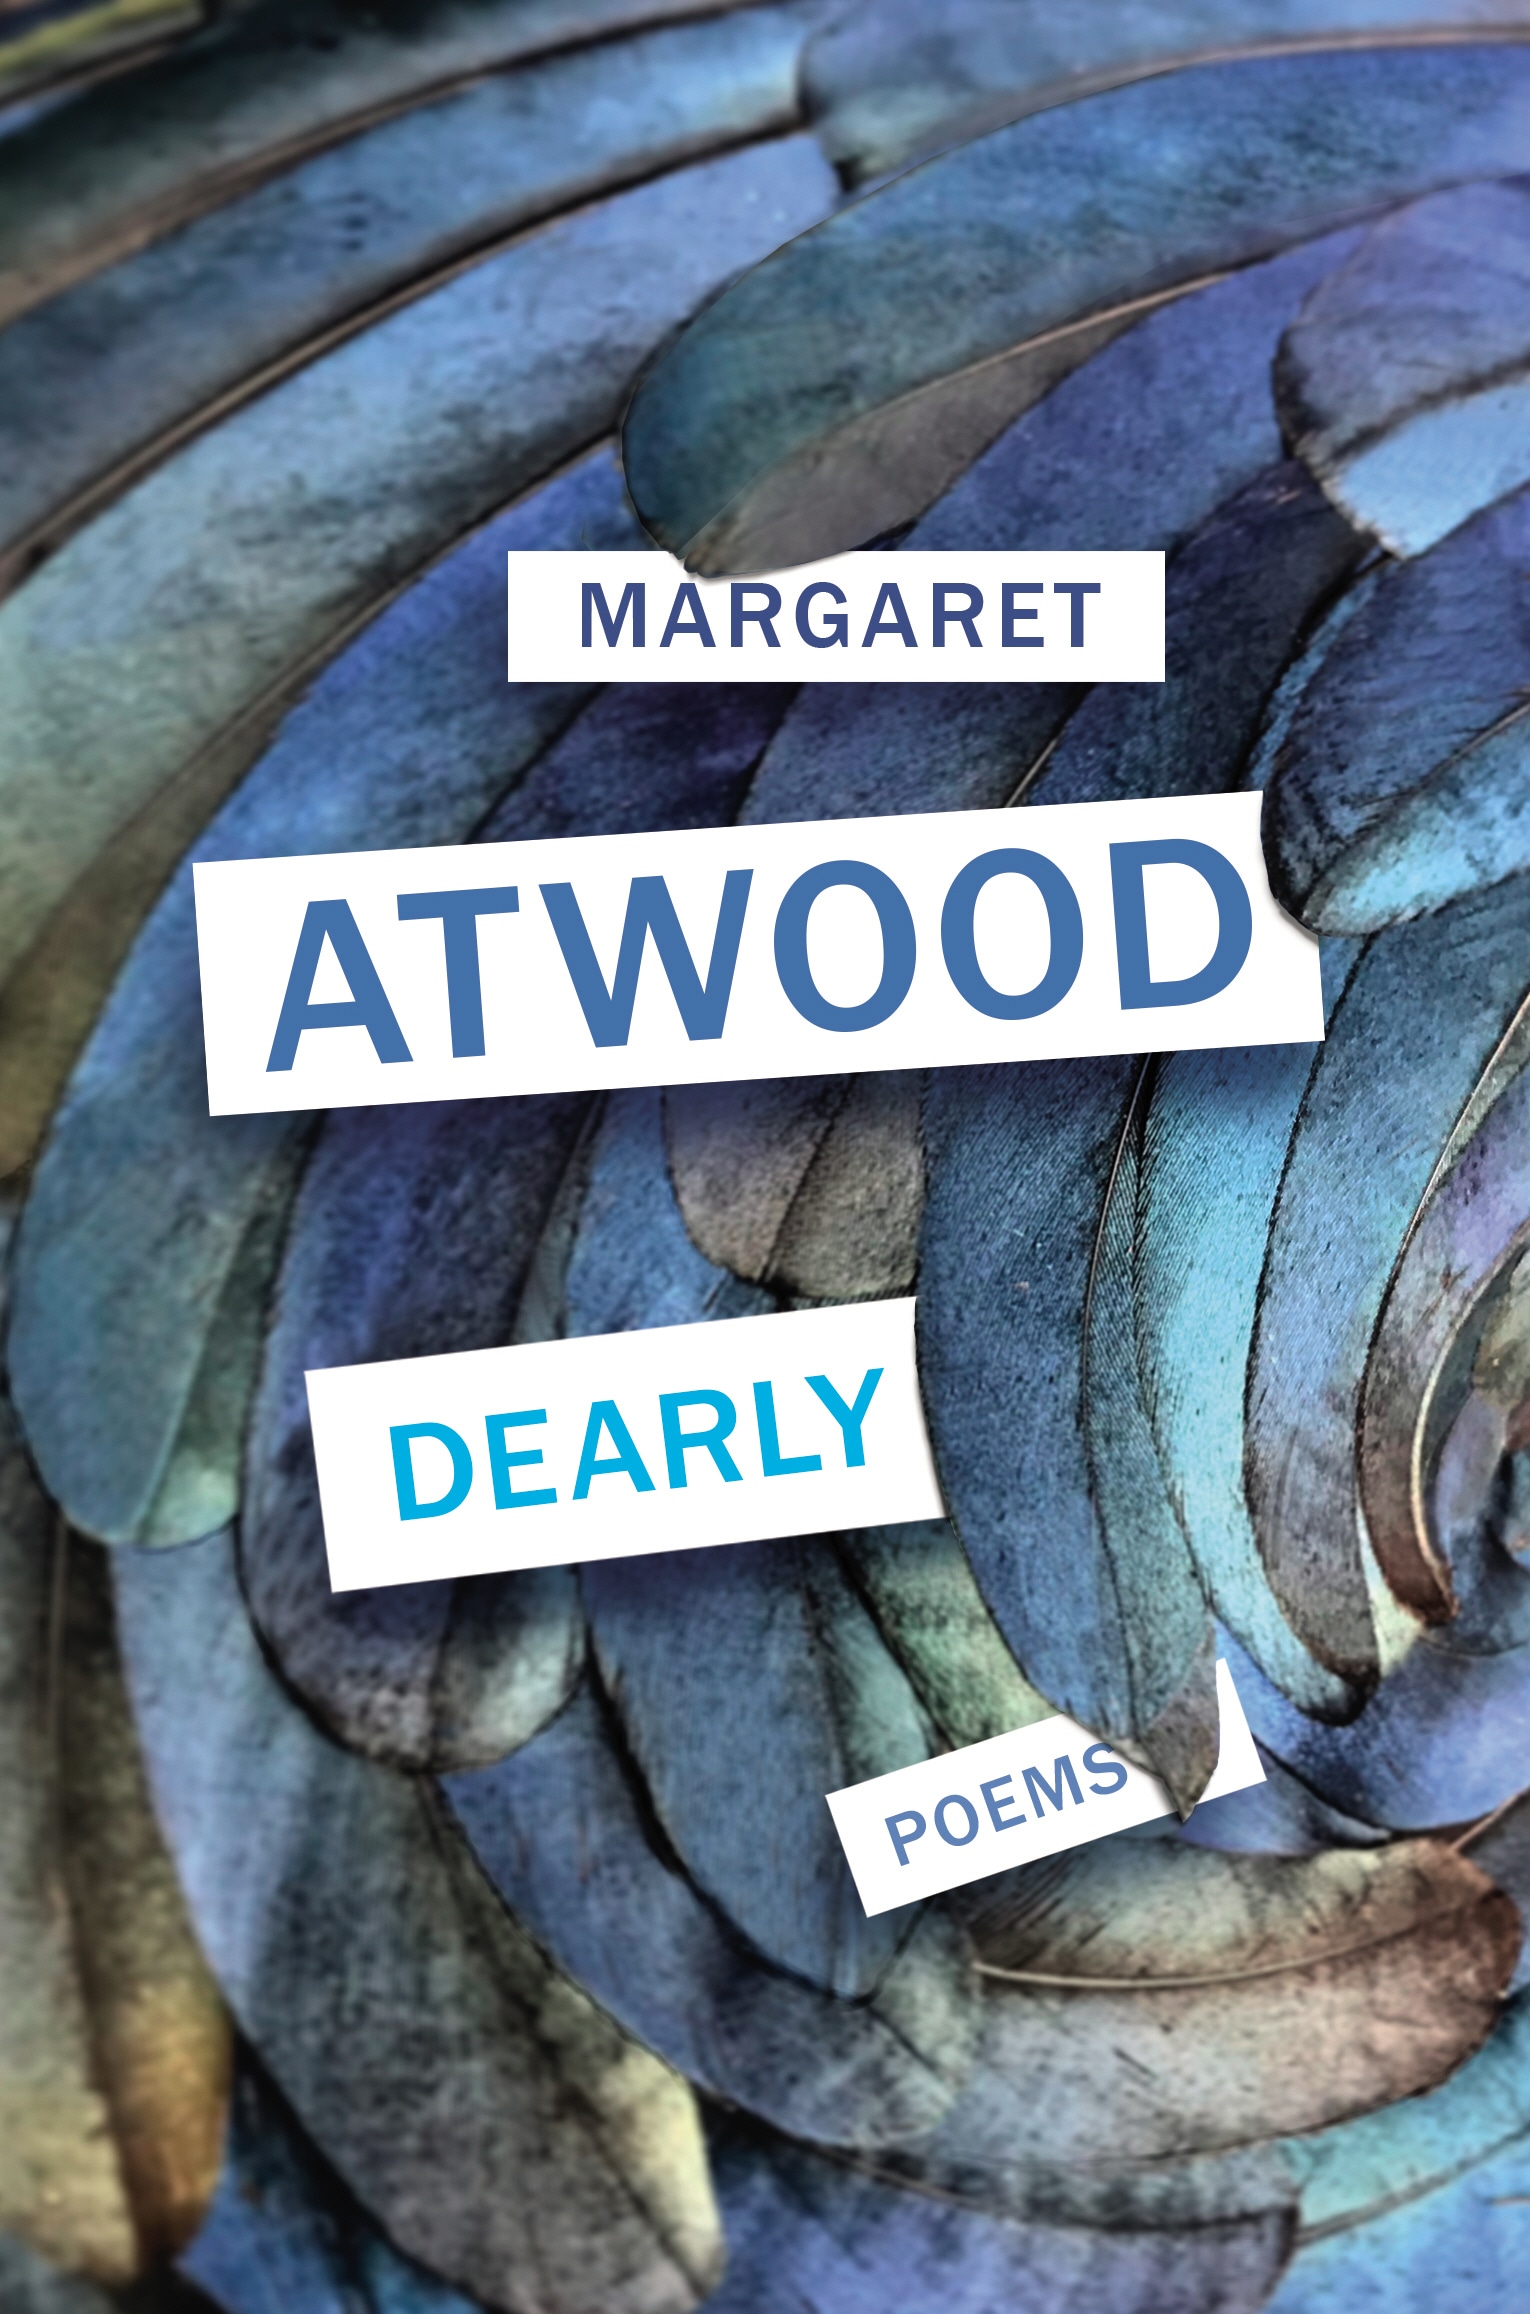 Book “Dearly” by Margaret Atwood — November 10, 2020